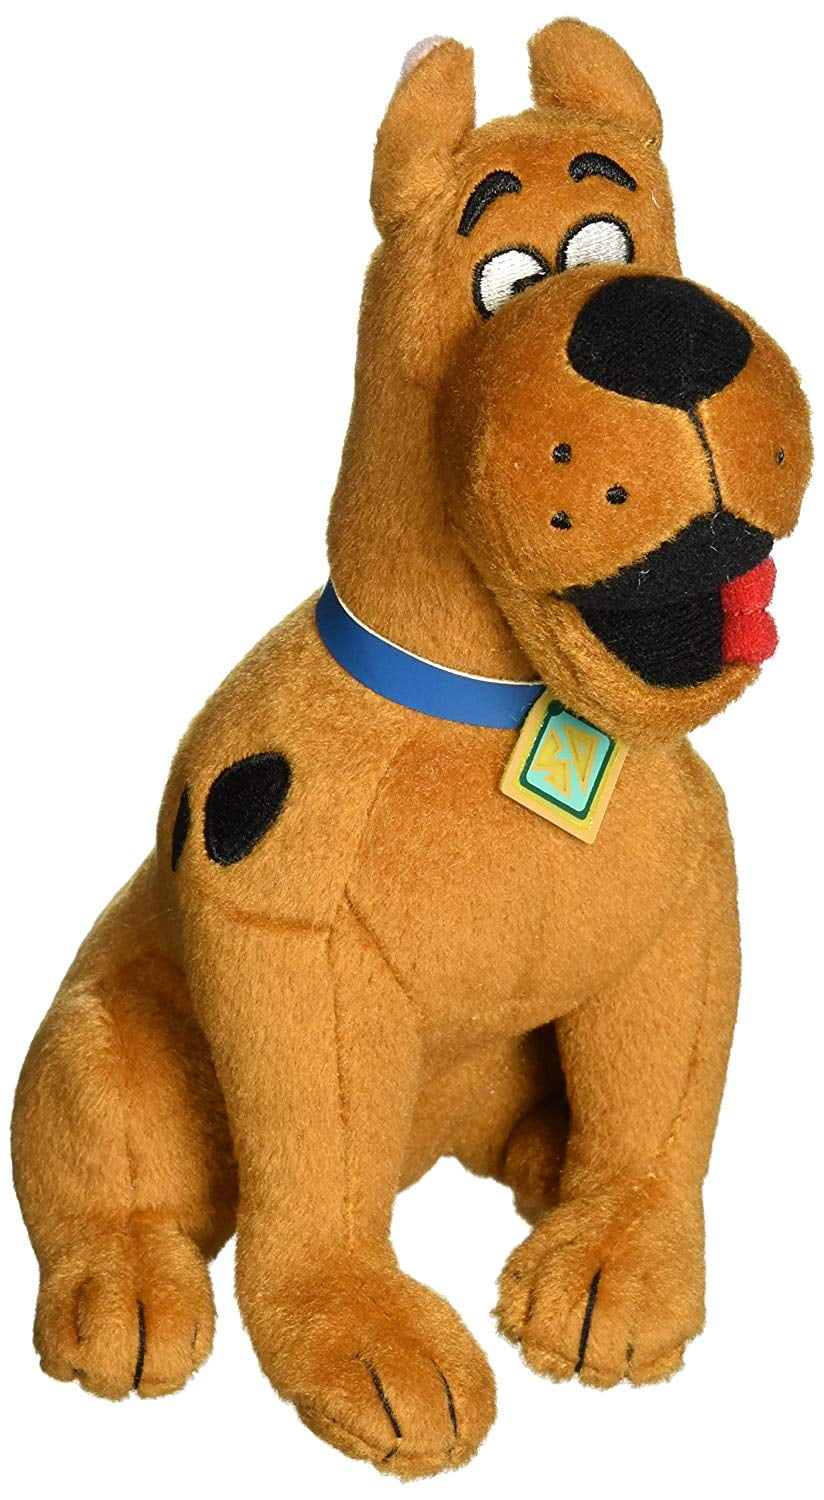 Scoob 2020 Scooby Doo Animated Movie Muttley 8" Plush Stuffed Animal Dog Figure for sale online 